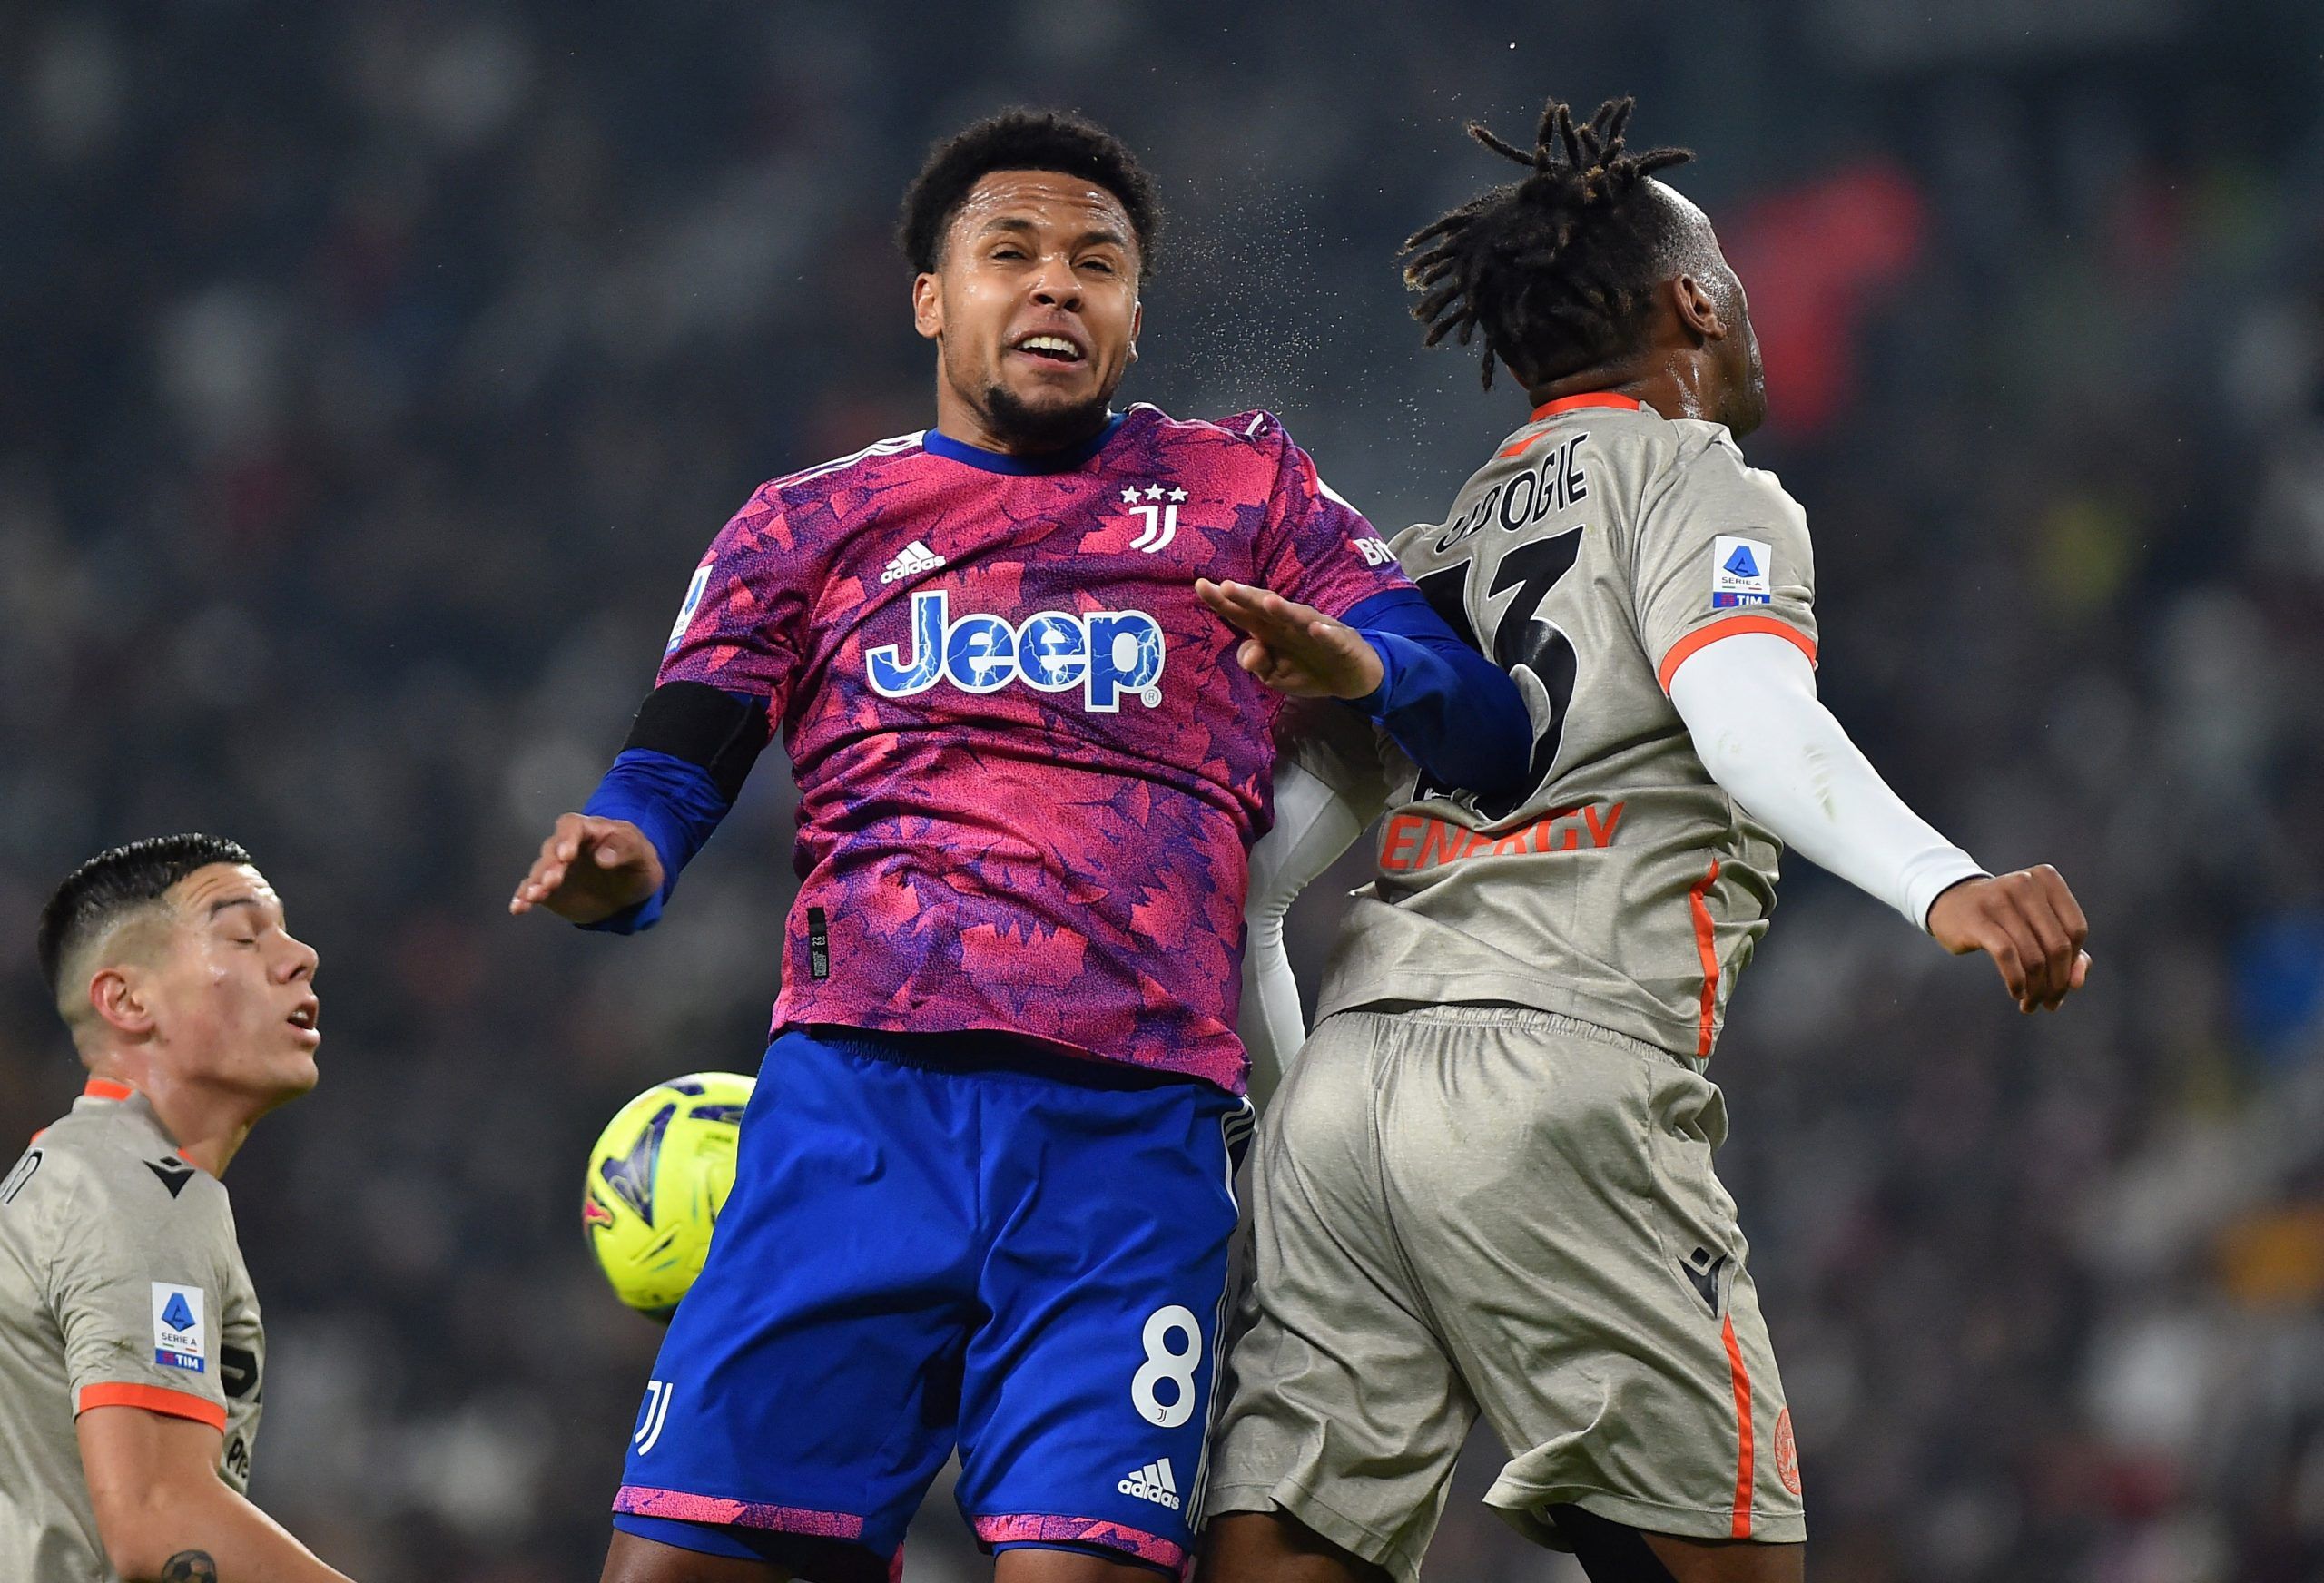 Soccer Football - Serie A - Juventus v Udinese - Allianz Stadium, Turin, Italy - January 7, 2023 Juventus' Weston McKennie in action with Udinese's Destiny Udogie REUTERS/Massimo Pinca